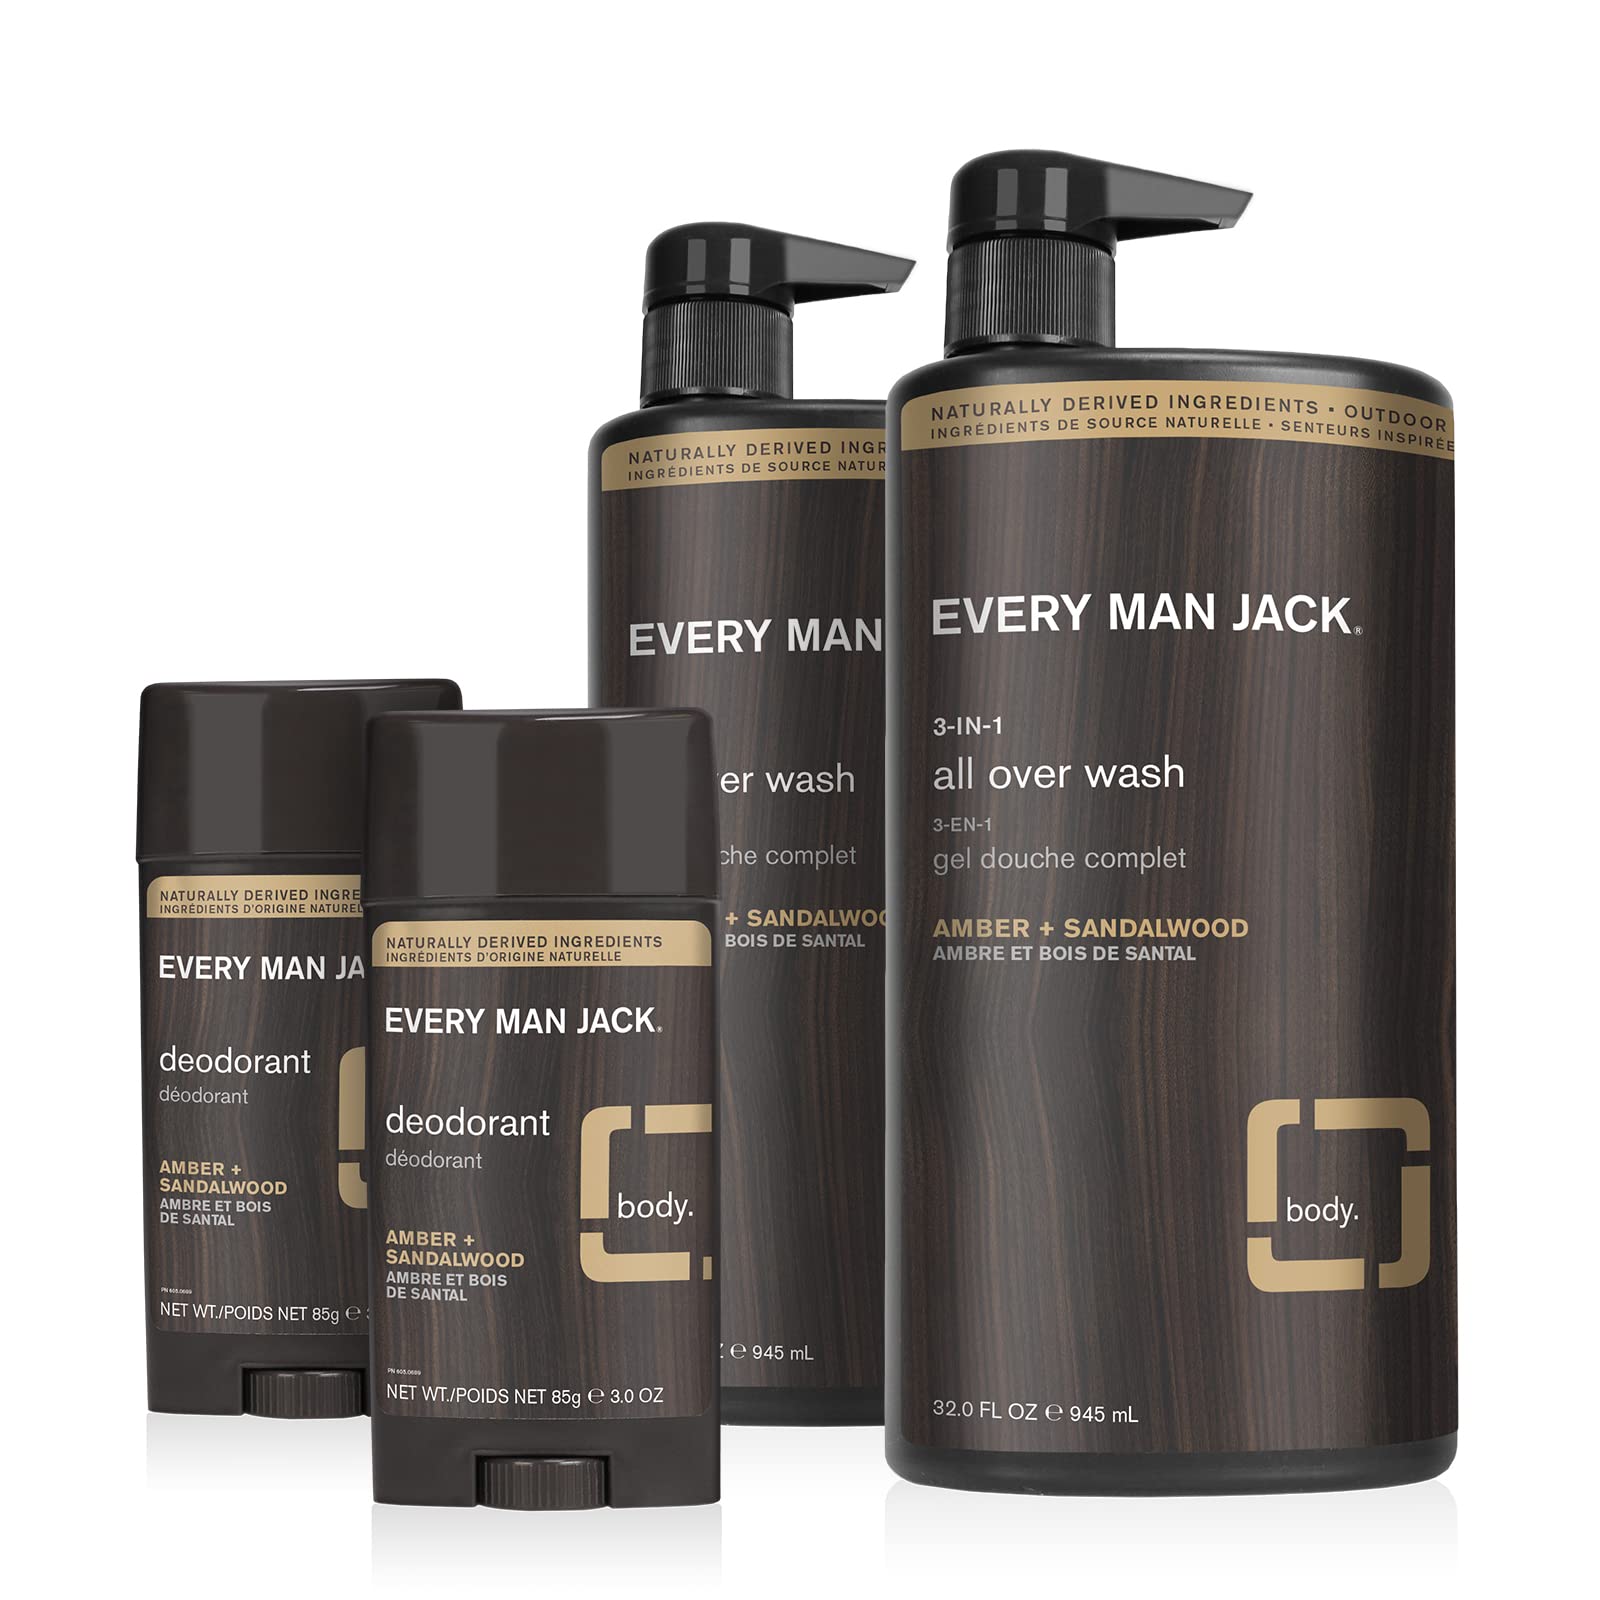 Every Man Jack Men’s All Over Wash + Deodorant Set - Cleanse All Skin Types and Fight Odors with Naturally Derived Ingredients and Amber + Sandalwood Scent - All Over Wash Twin Pack + Deo Twin Pack